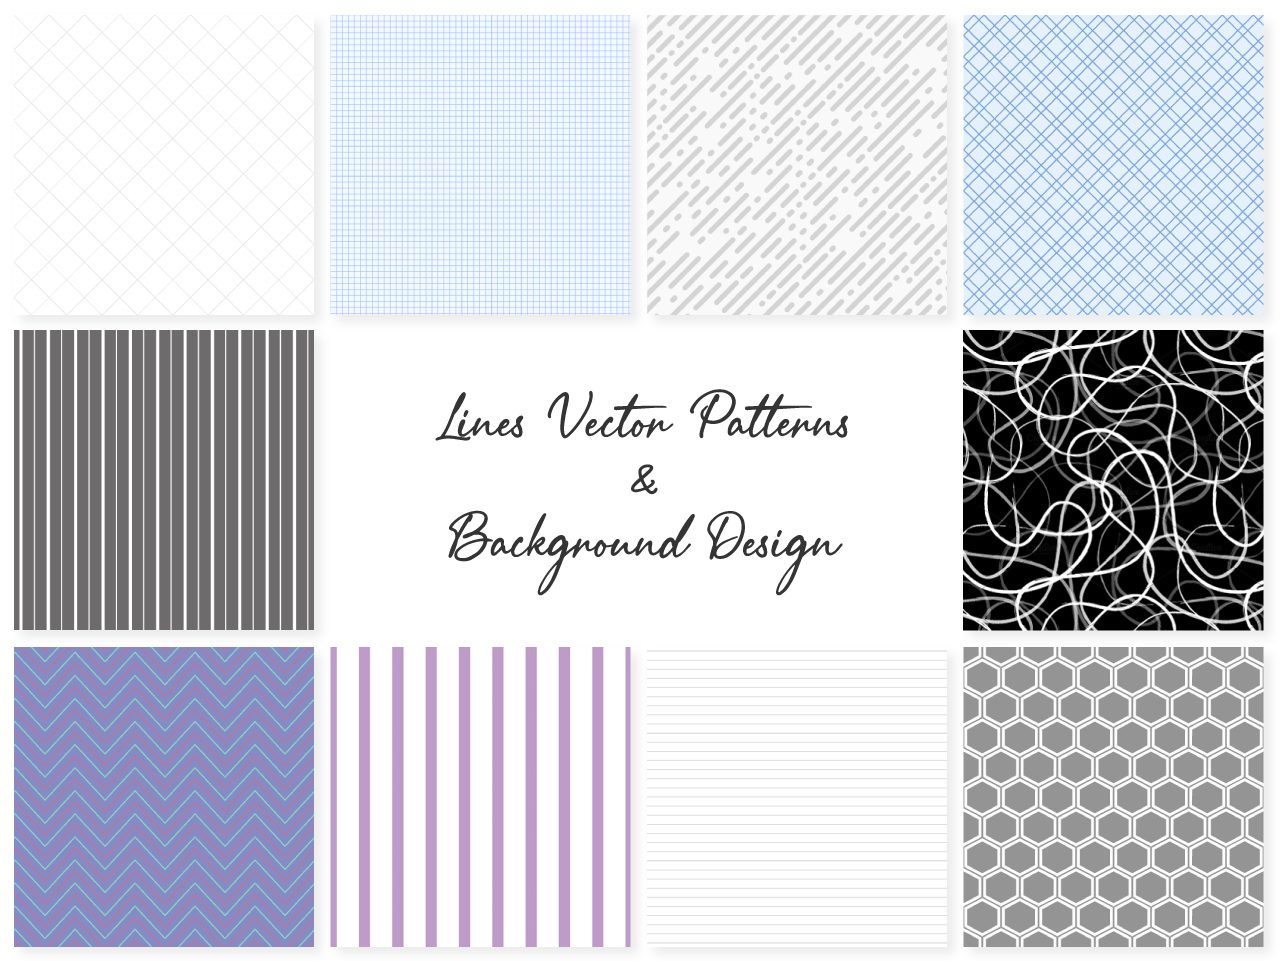 Line Vector Patterns and Background Designs - WowPatterns